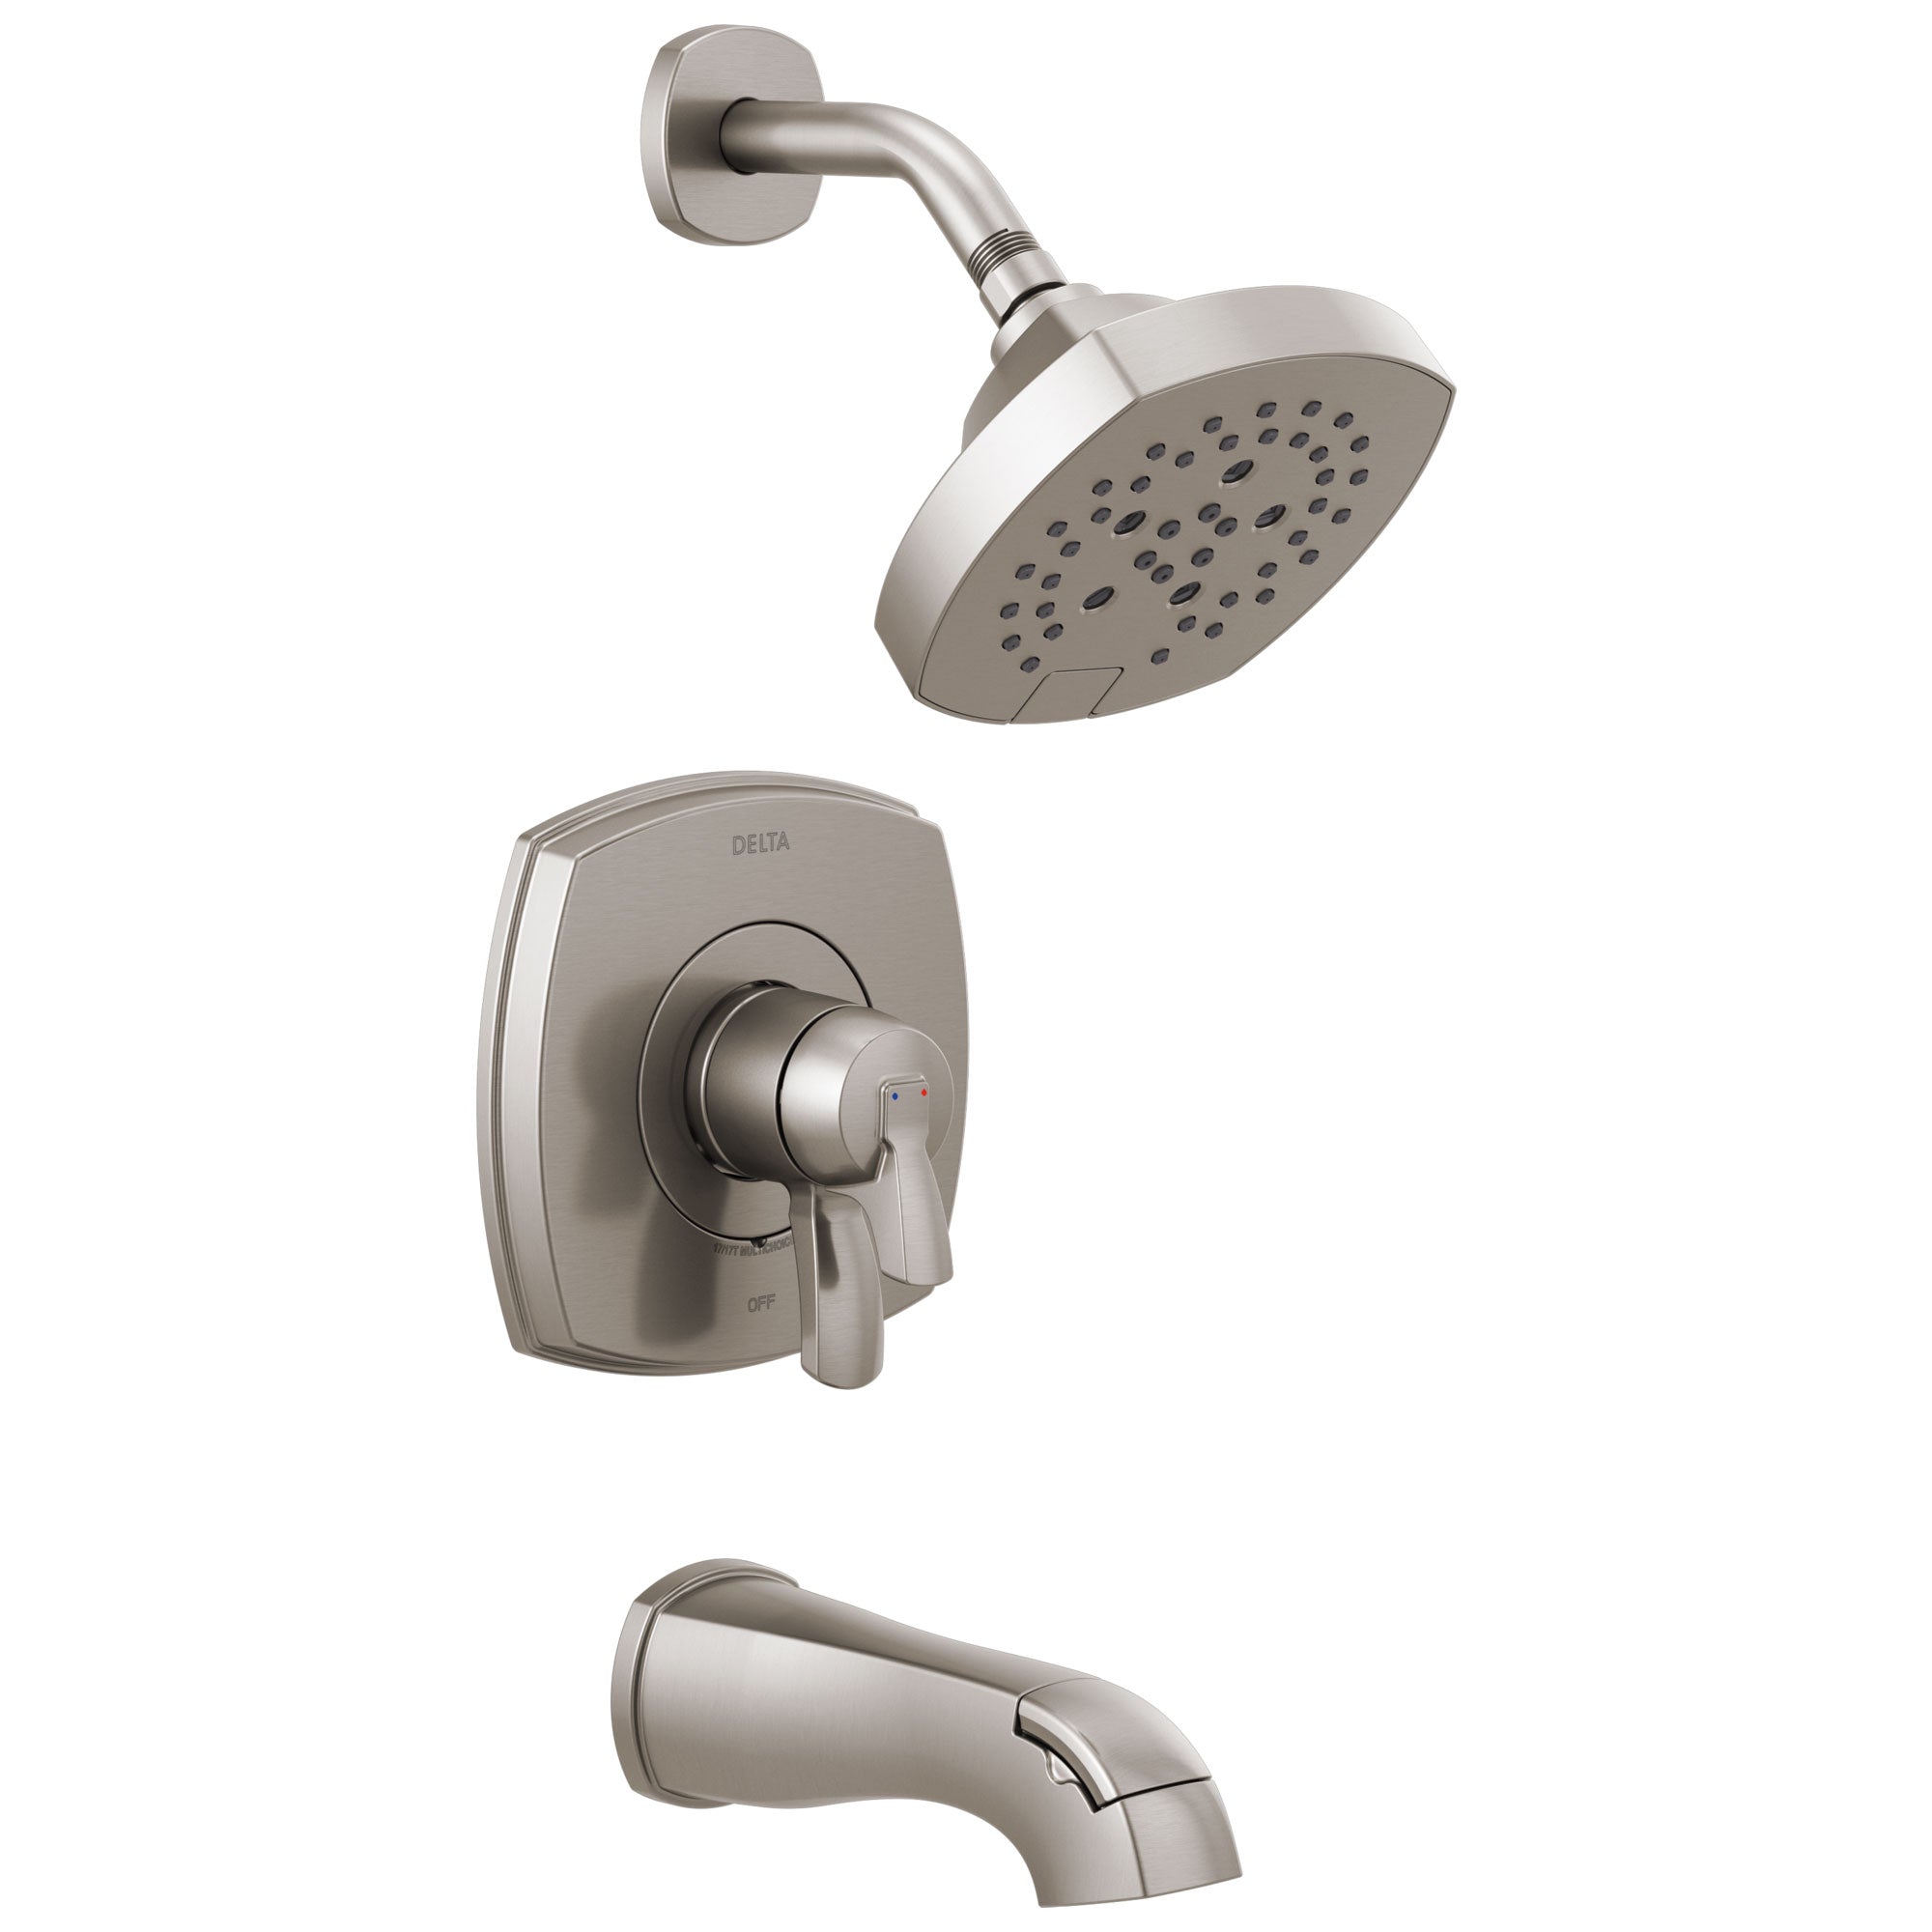 Delta Stryke Stainless Steel Finish 17 Series Tub and Shower Combo Faucet Includes Handles, Cartridge, and Rough Valve with Stops D3330V